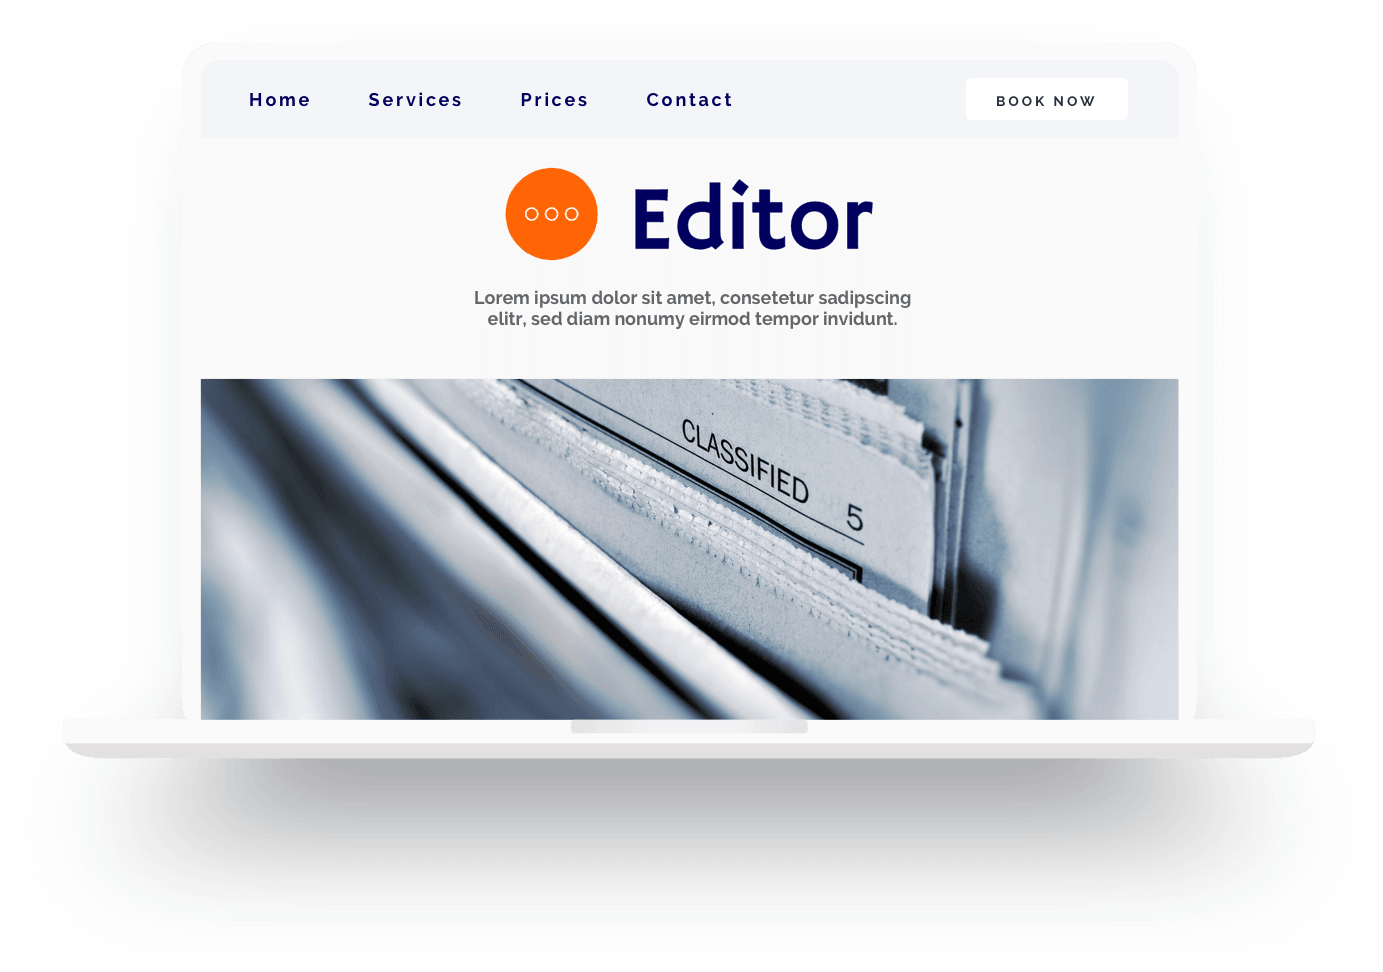 Example of a professional editor website built with Jimdo